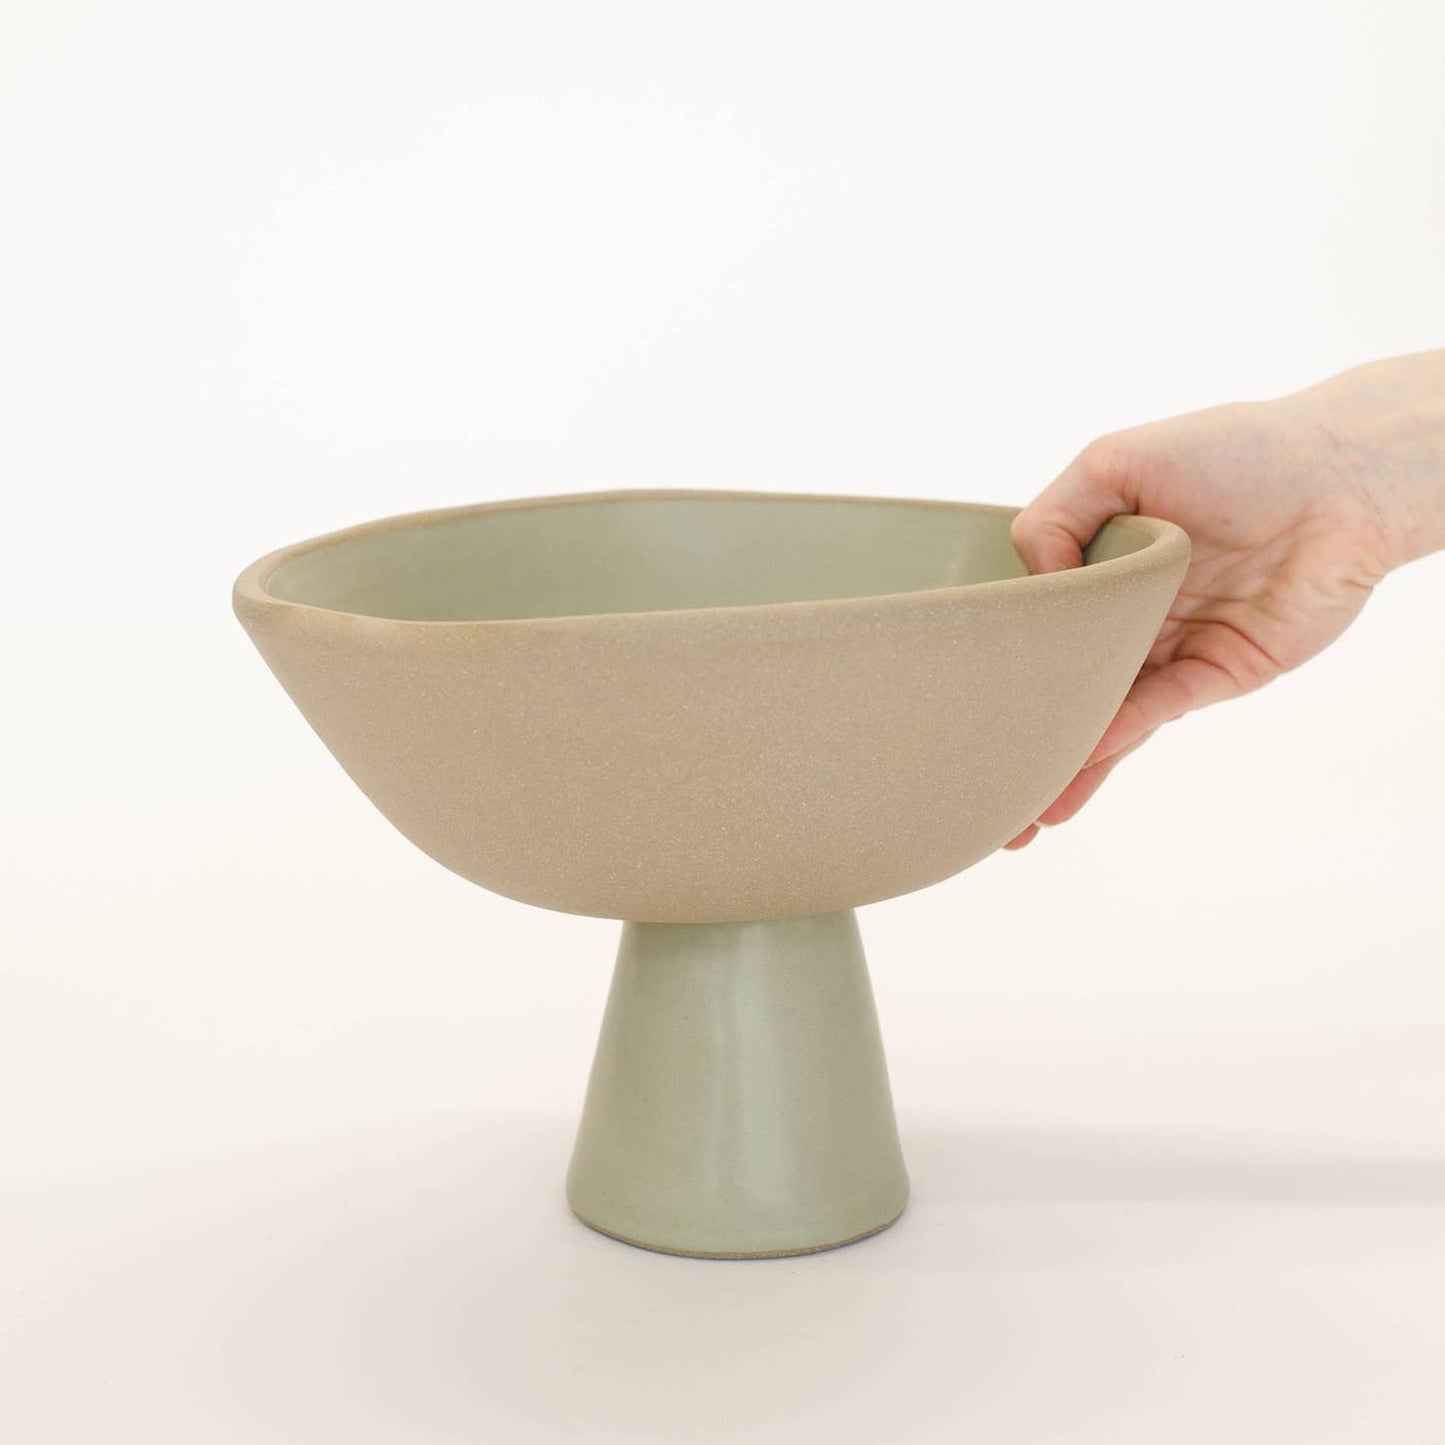 jars of dust ceramic raised serving bowl / Hand-built with shallow walls, some organic quality around the rim, and a flat base, this ceramic platter is designed for serving.  Use it as a charcuterie board, snack platter, coffee table tray, or your main course!  Handmade in Virginia